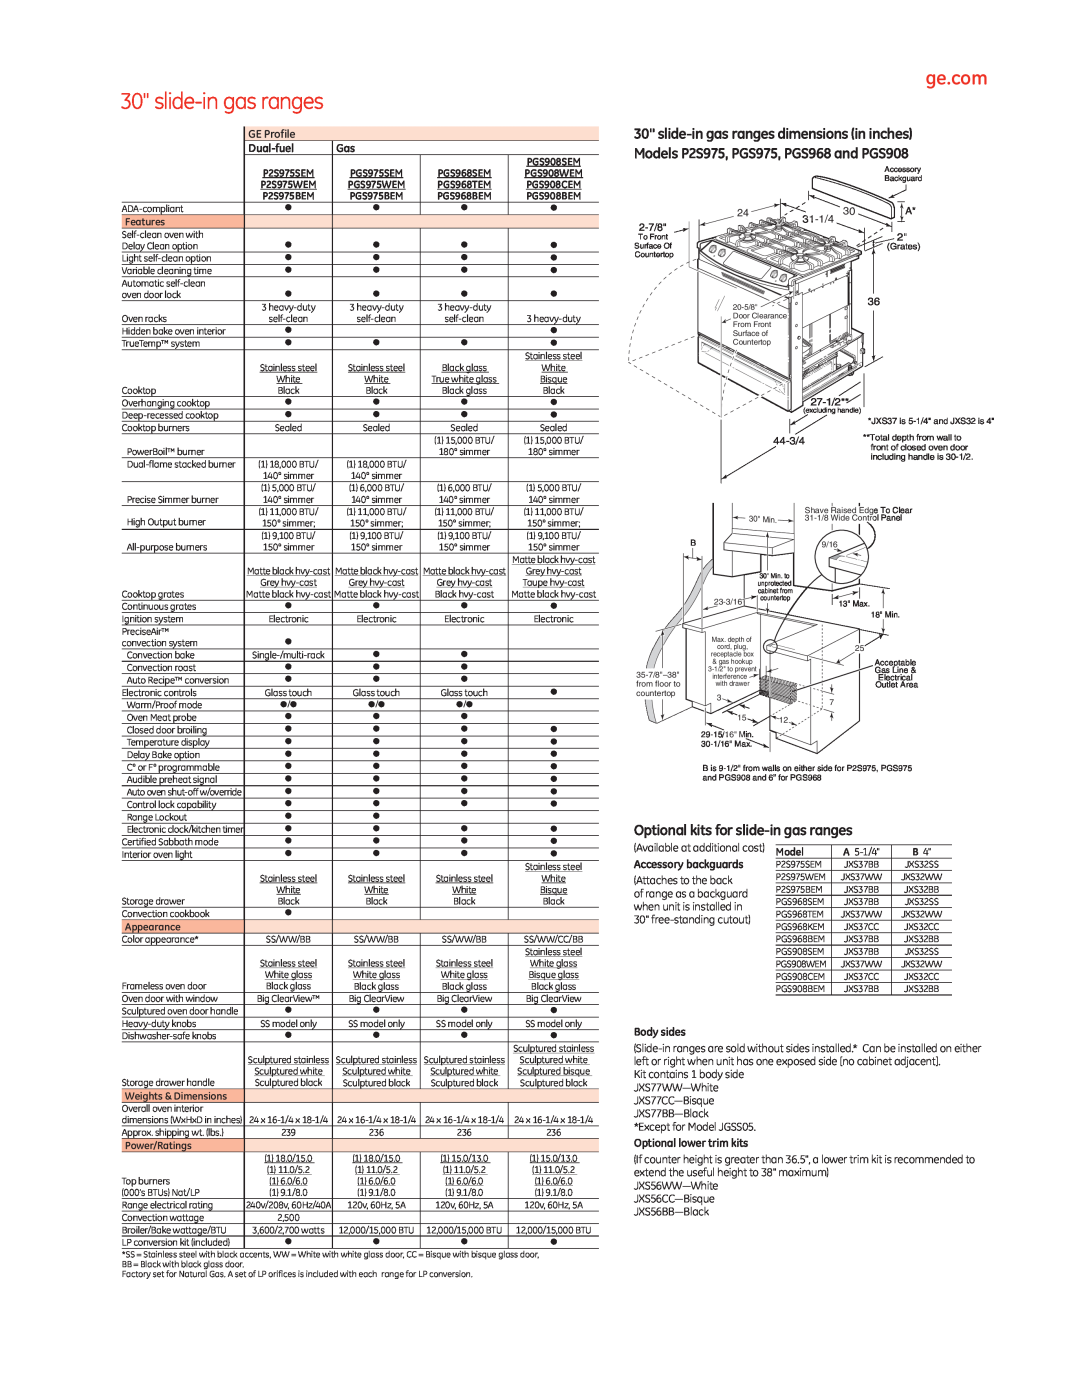 GE PGS975, PGS968, PGS908, P2S975 dimensions Optional kits for slide-in gas ranges 